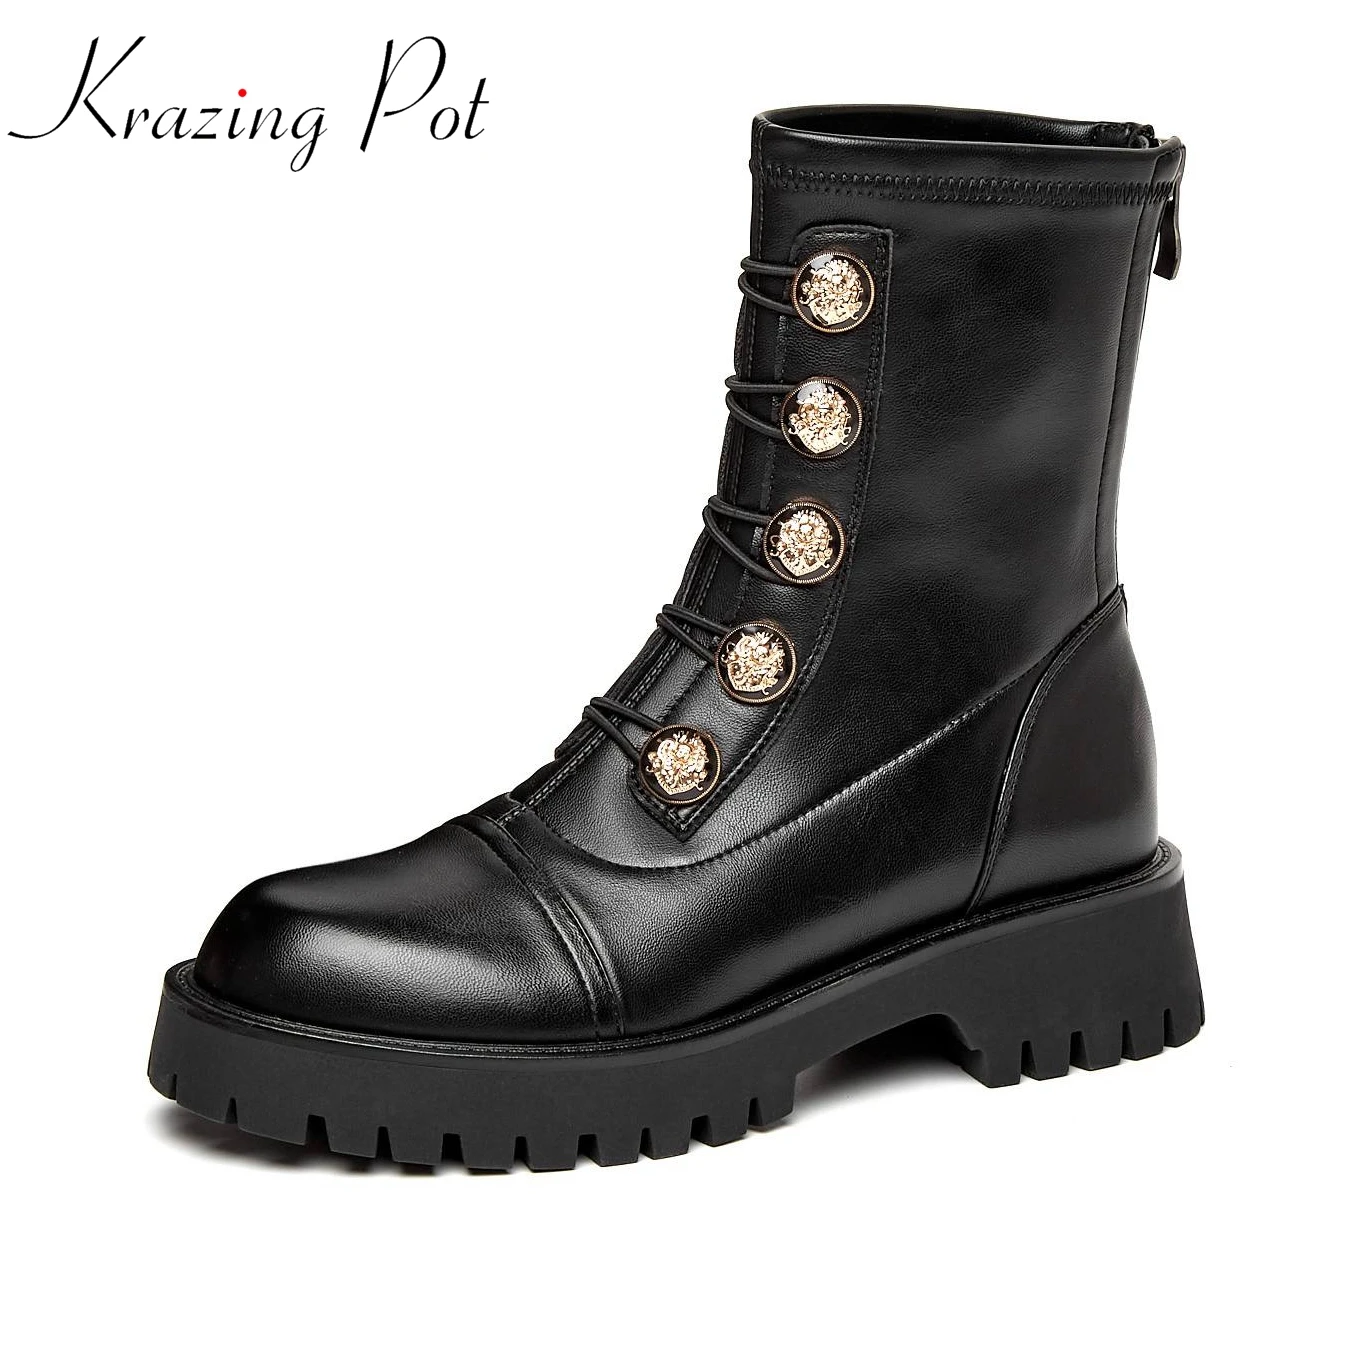 

Krazing Pot sheep leather round toe thick heels superstar western boots carved artistic metal buttons zip keep warm ankle boots